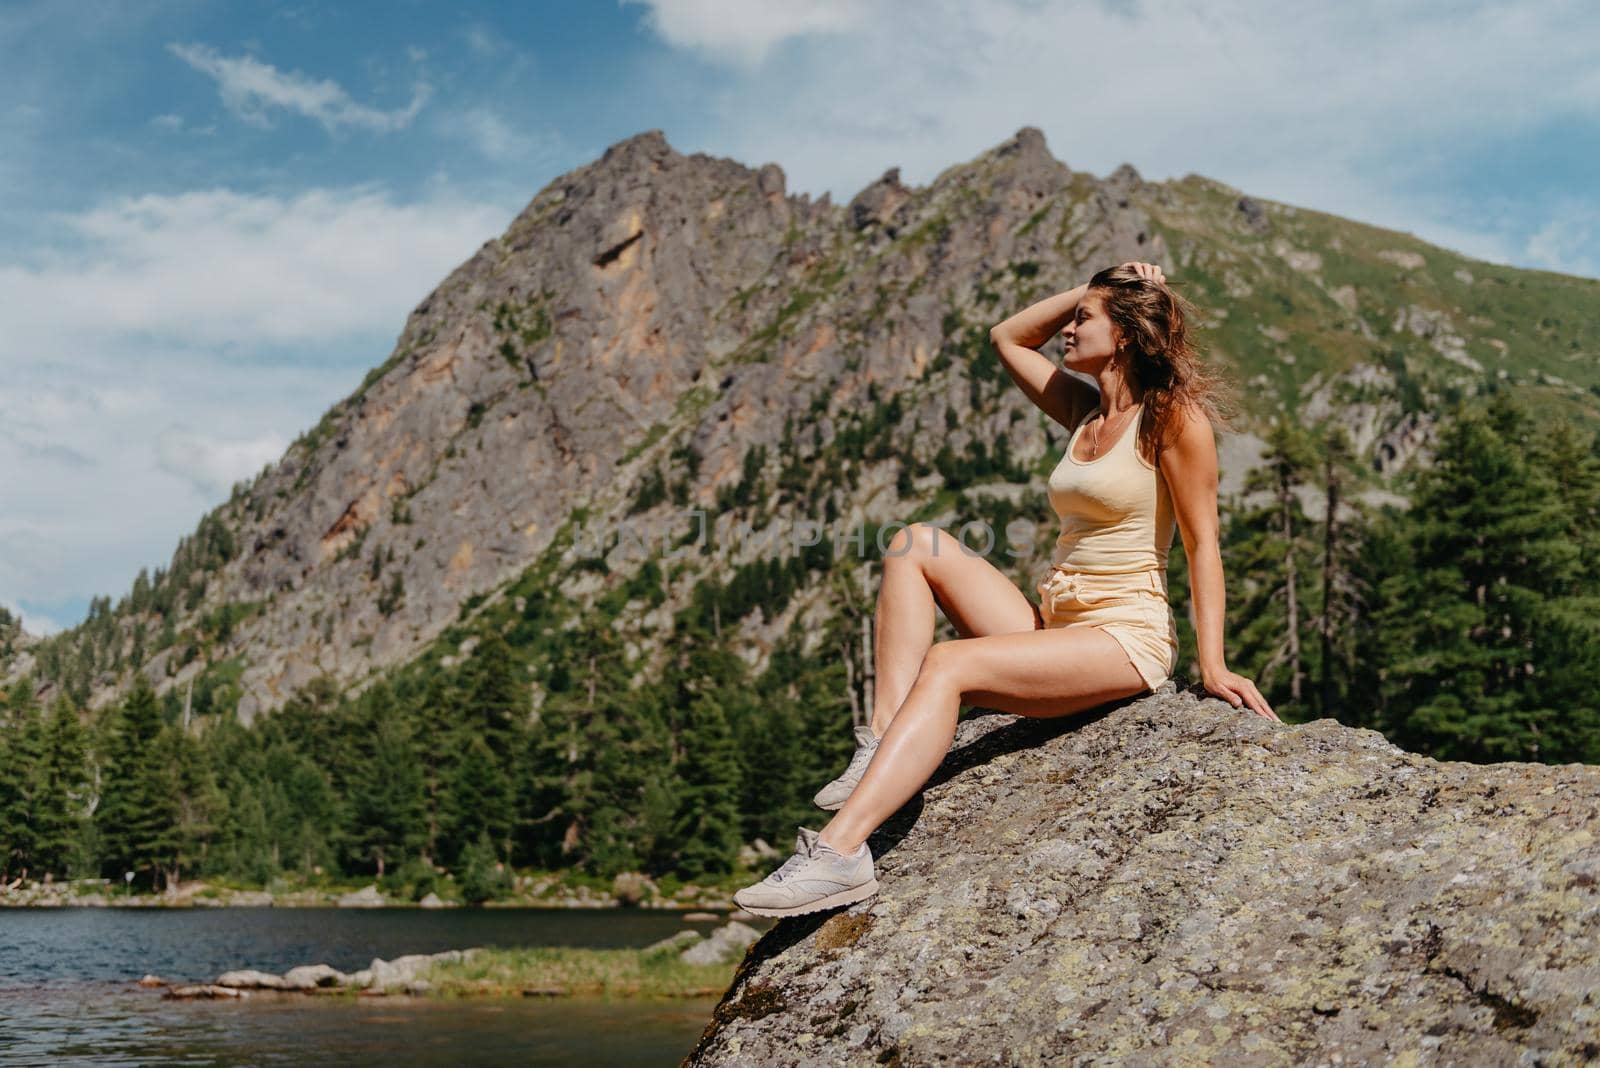 Tourist girl enjoys the magical view of the lake, coniferous forest and magical view sitting on big stone on the shore of a turquoise lake in the mountains. Hiking in the Natural Park. Cute girl tourist sitting on a large stone by the lake. The water is clear, stones are visible under the water. by Andrii_Ko